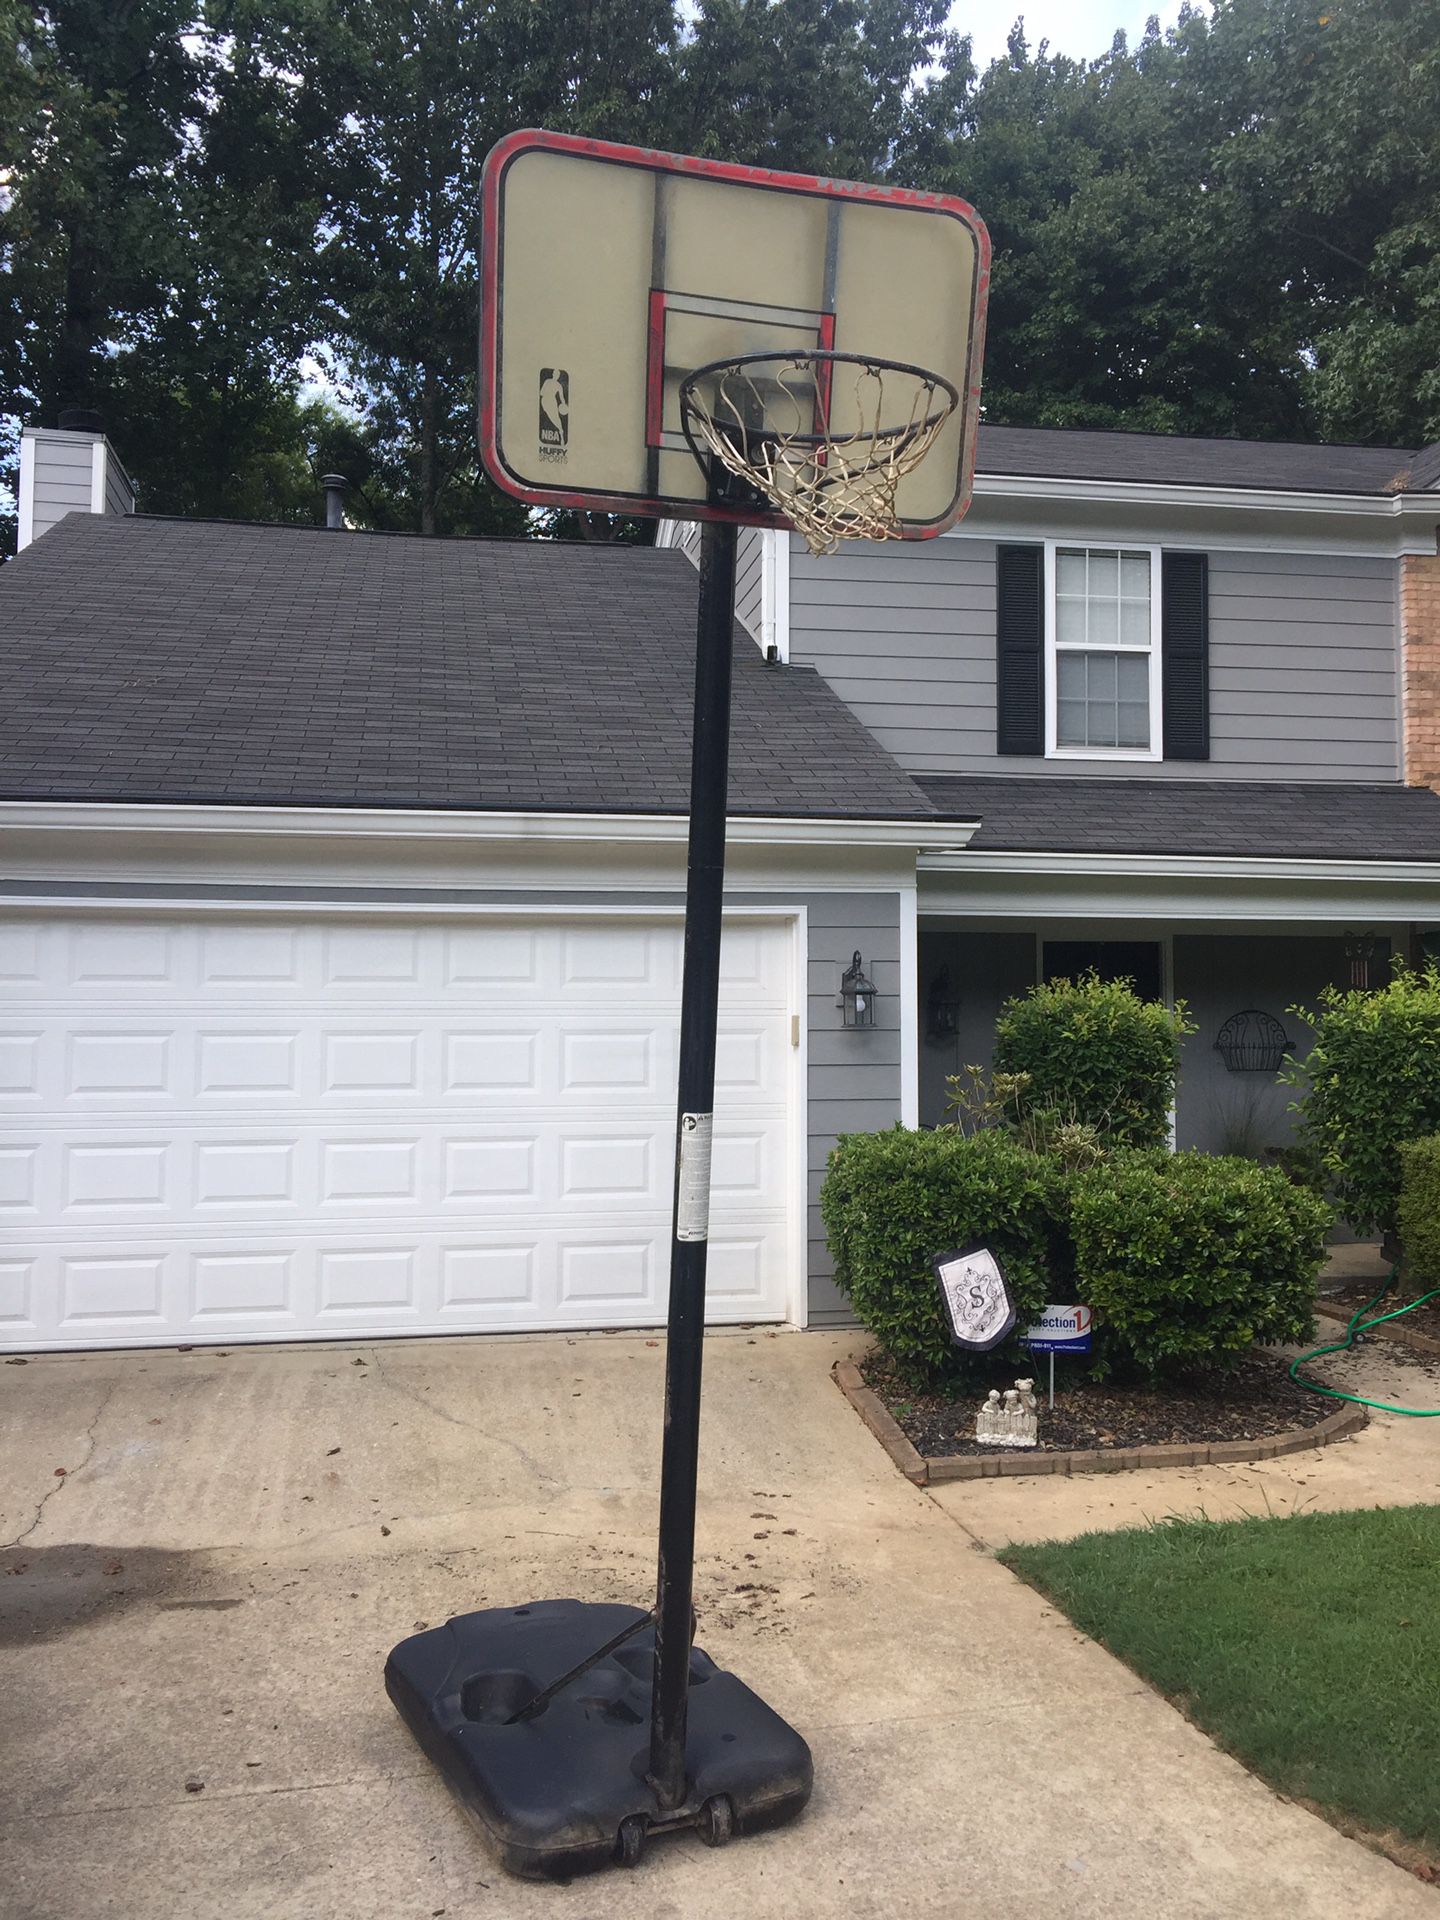 Free basketball pole and backboard - end of driveway - 1st come 1st serve